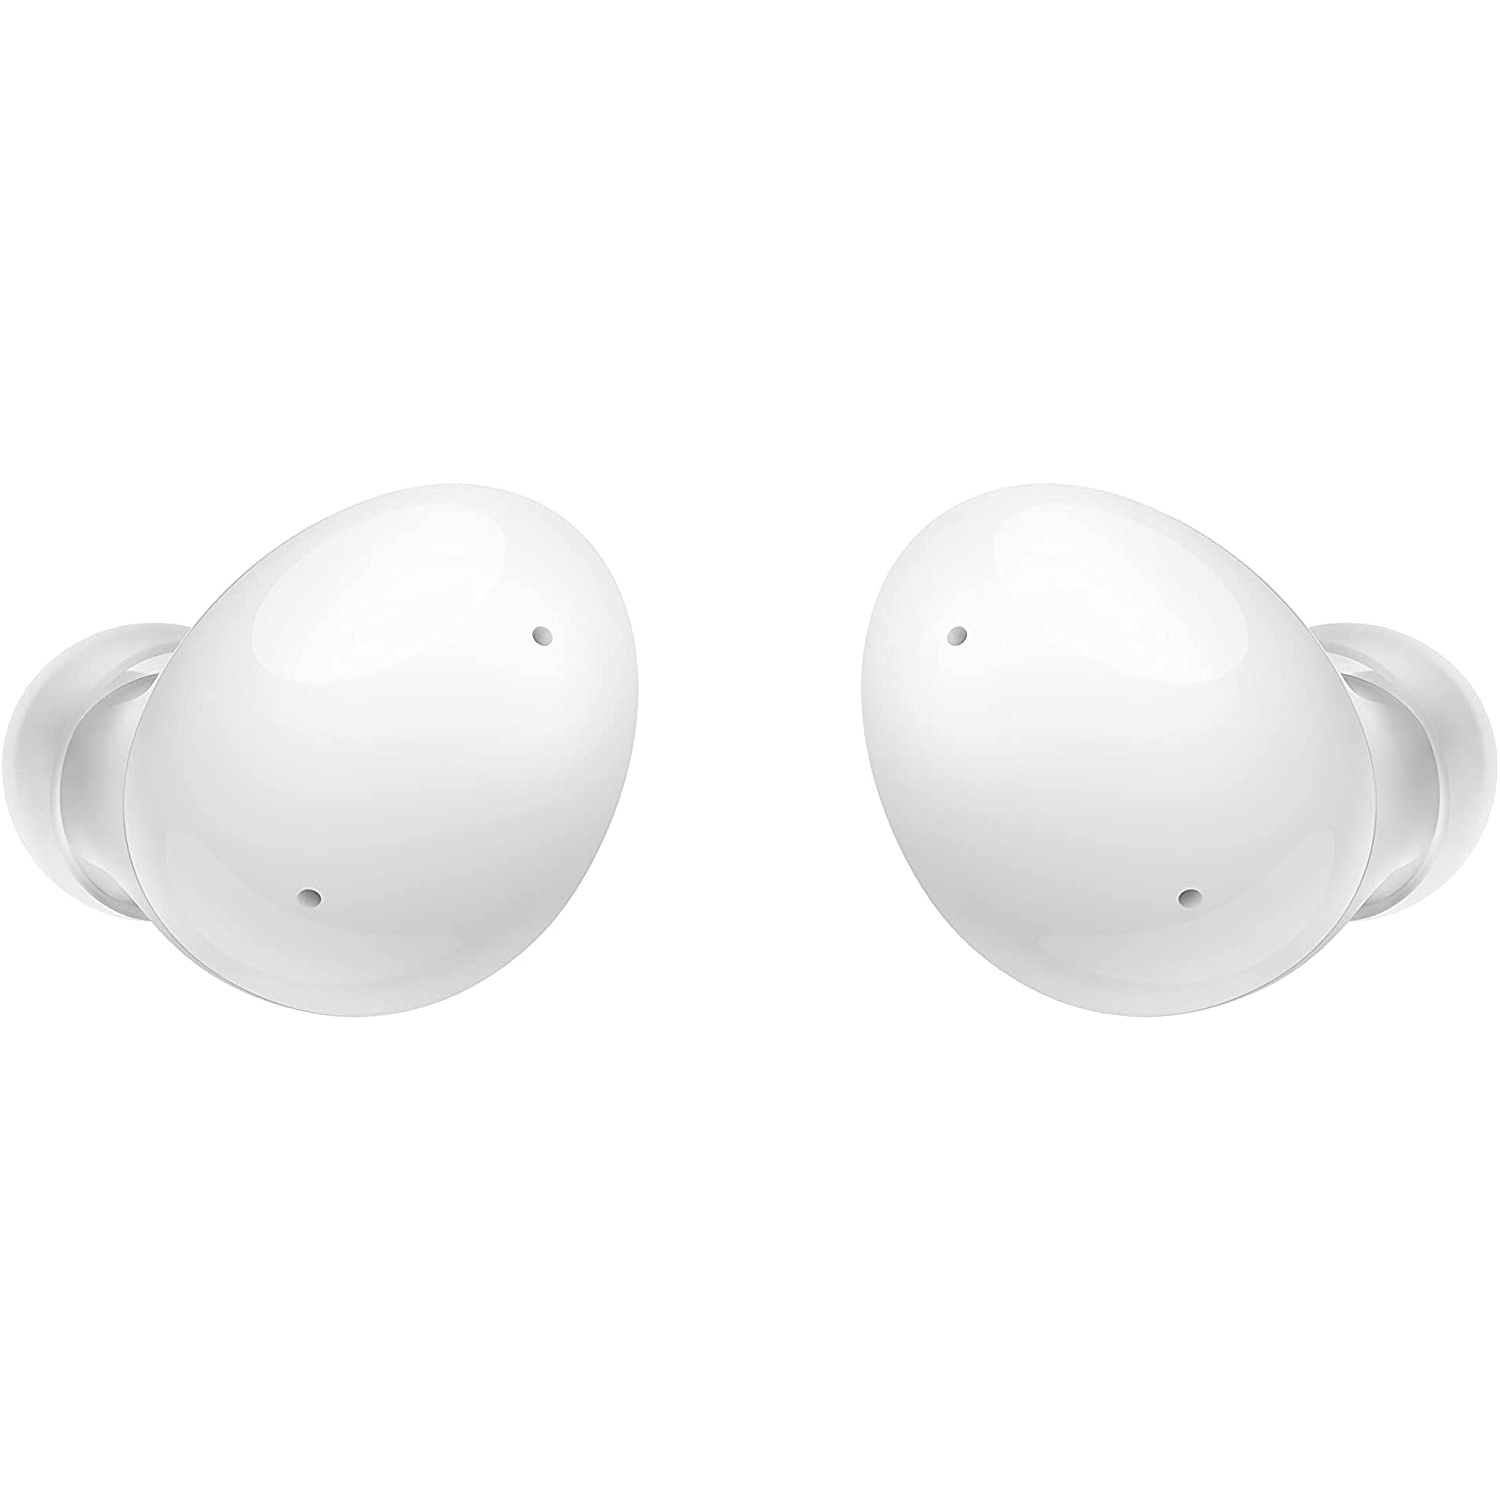 Samsung Galaxy Buds 2 True Wireless Noise Cancelling Bluetooth Earbuds - White - Certified Refurbished